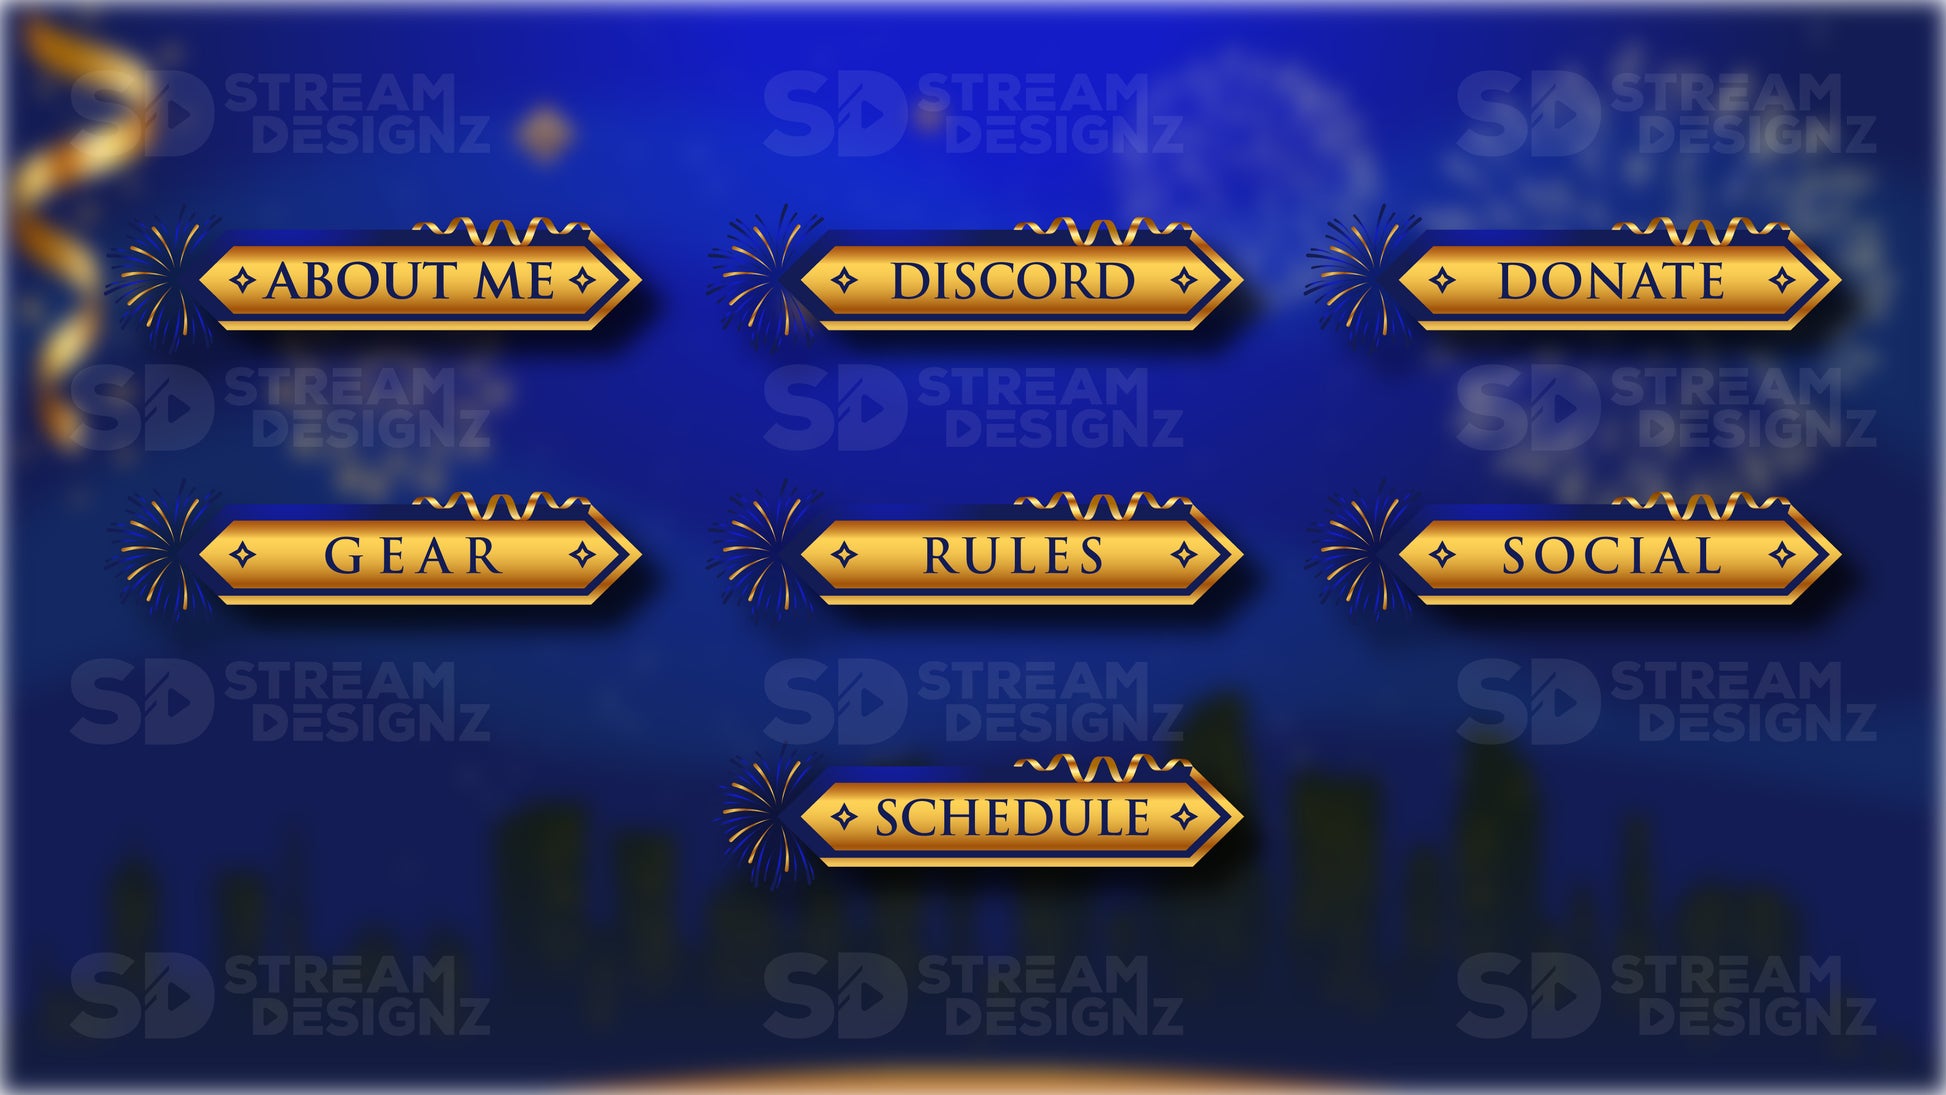 twitch panels happy new year feature image stream designz